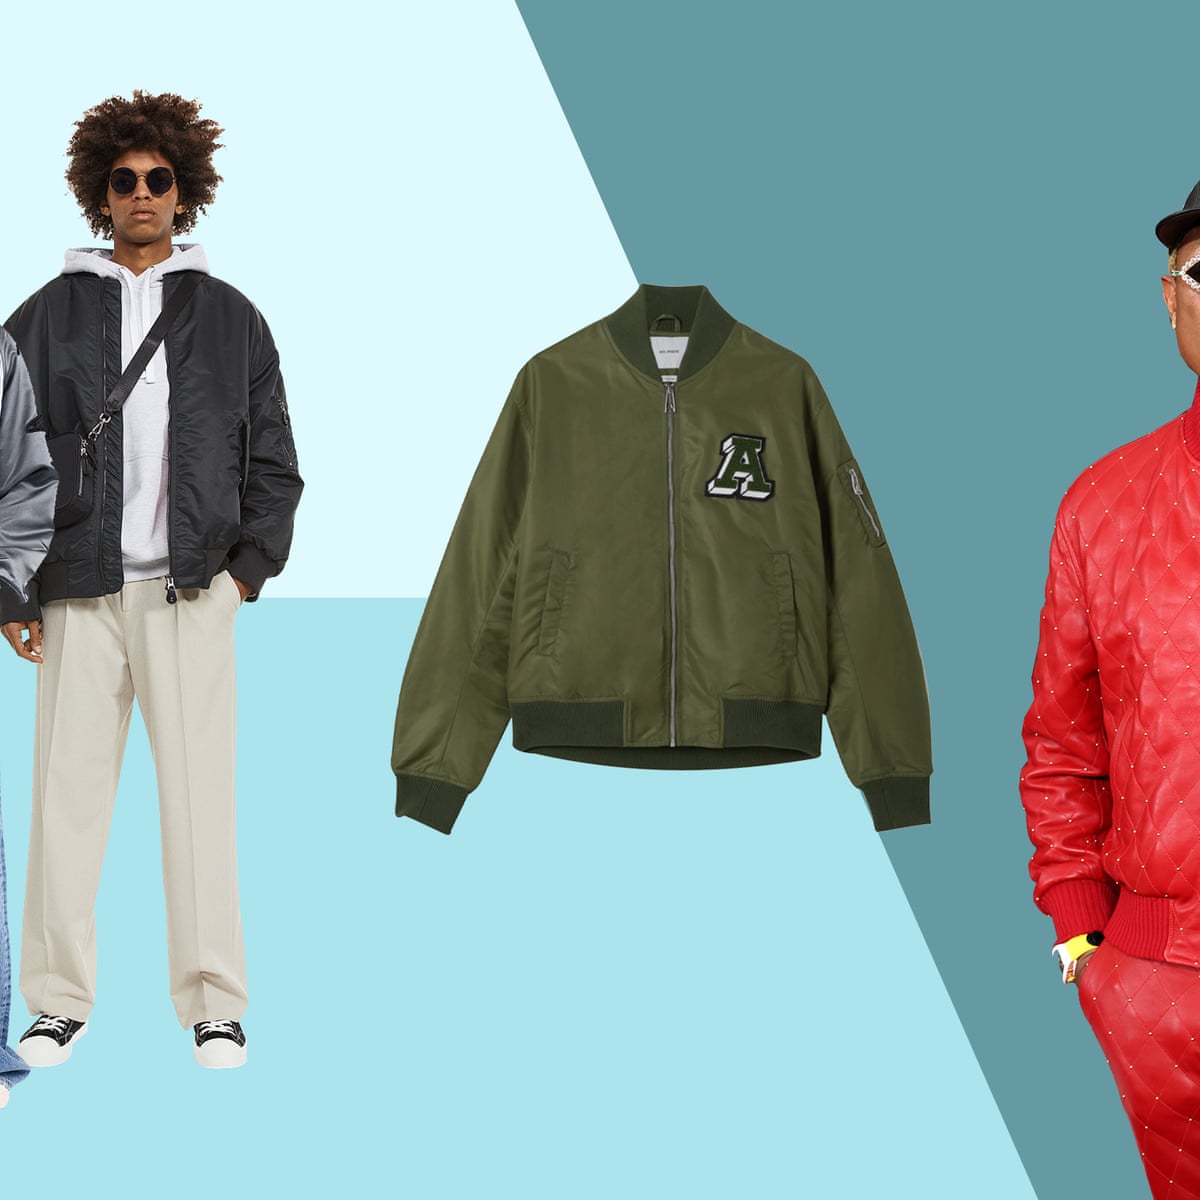 Bomber command – the classic men's jacket is back in style, Fashion